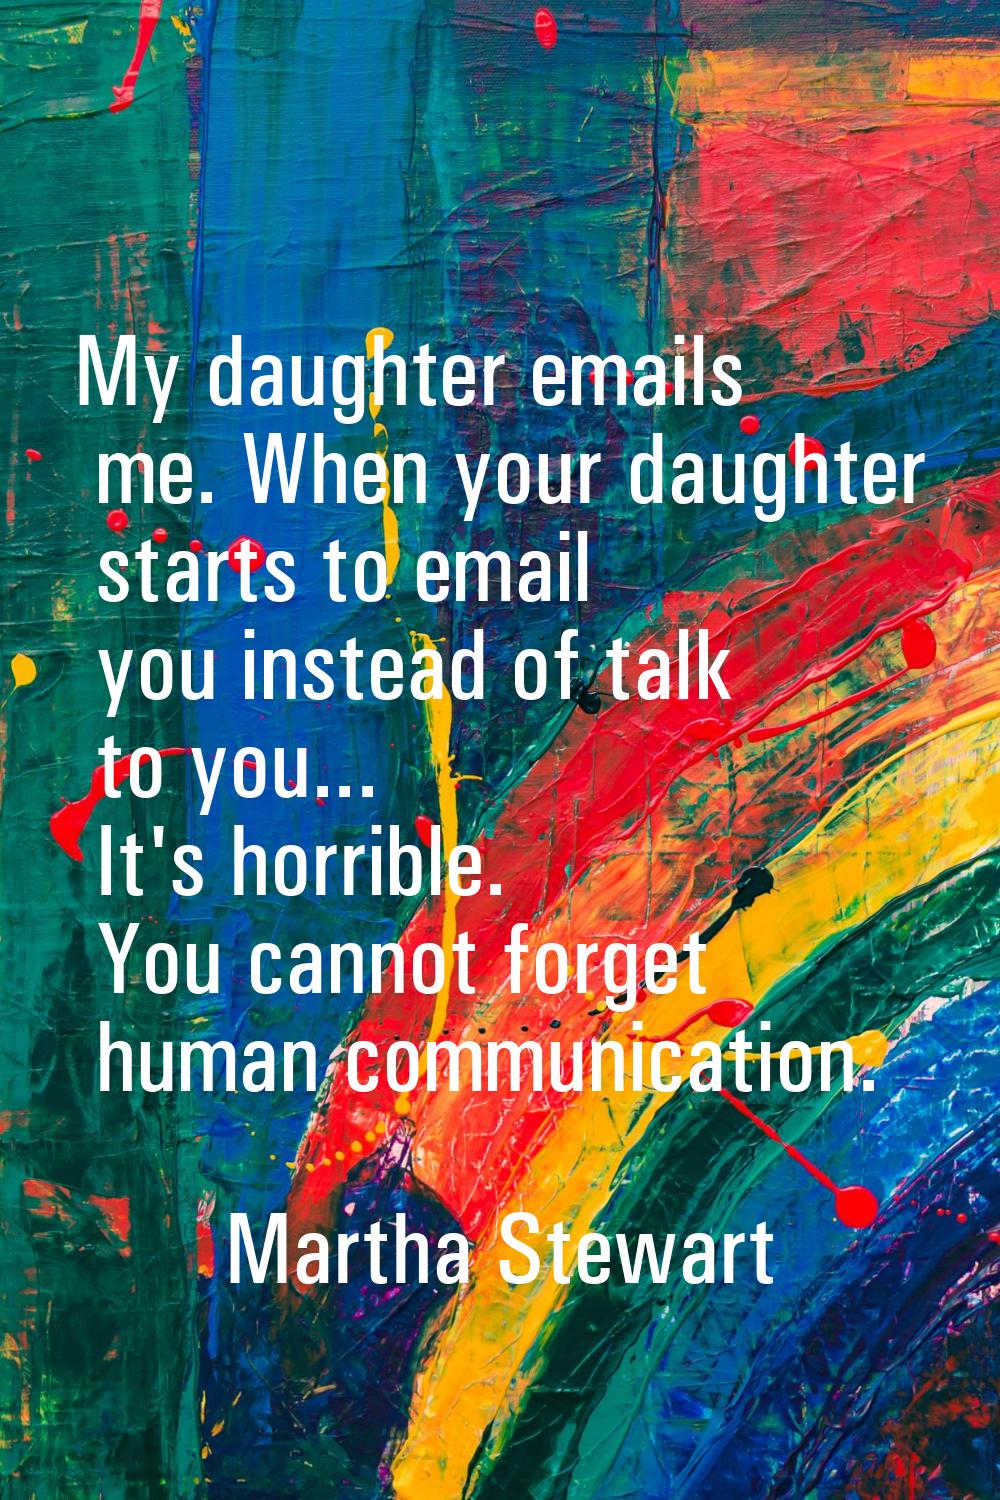 My daughter emails me. When your daughter starts to email you instead of talk to you... It's horrib